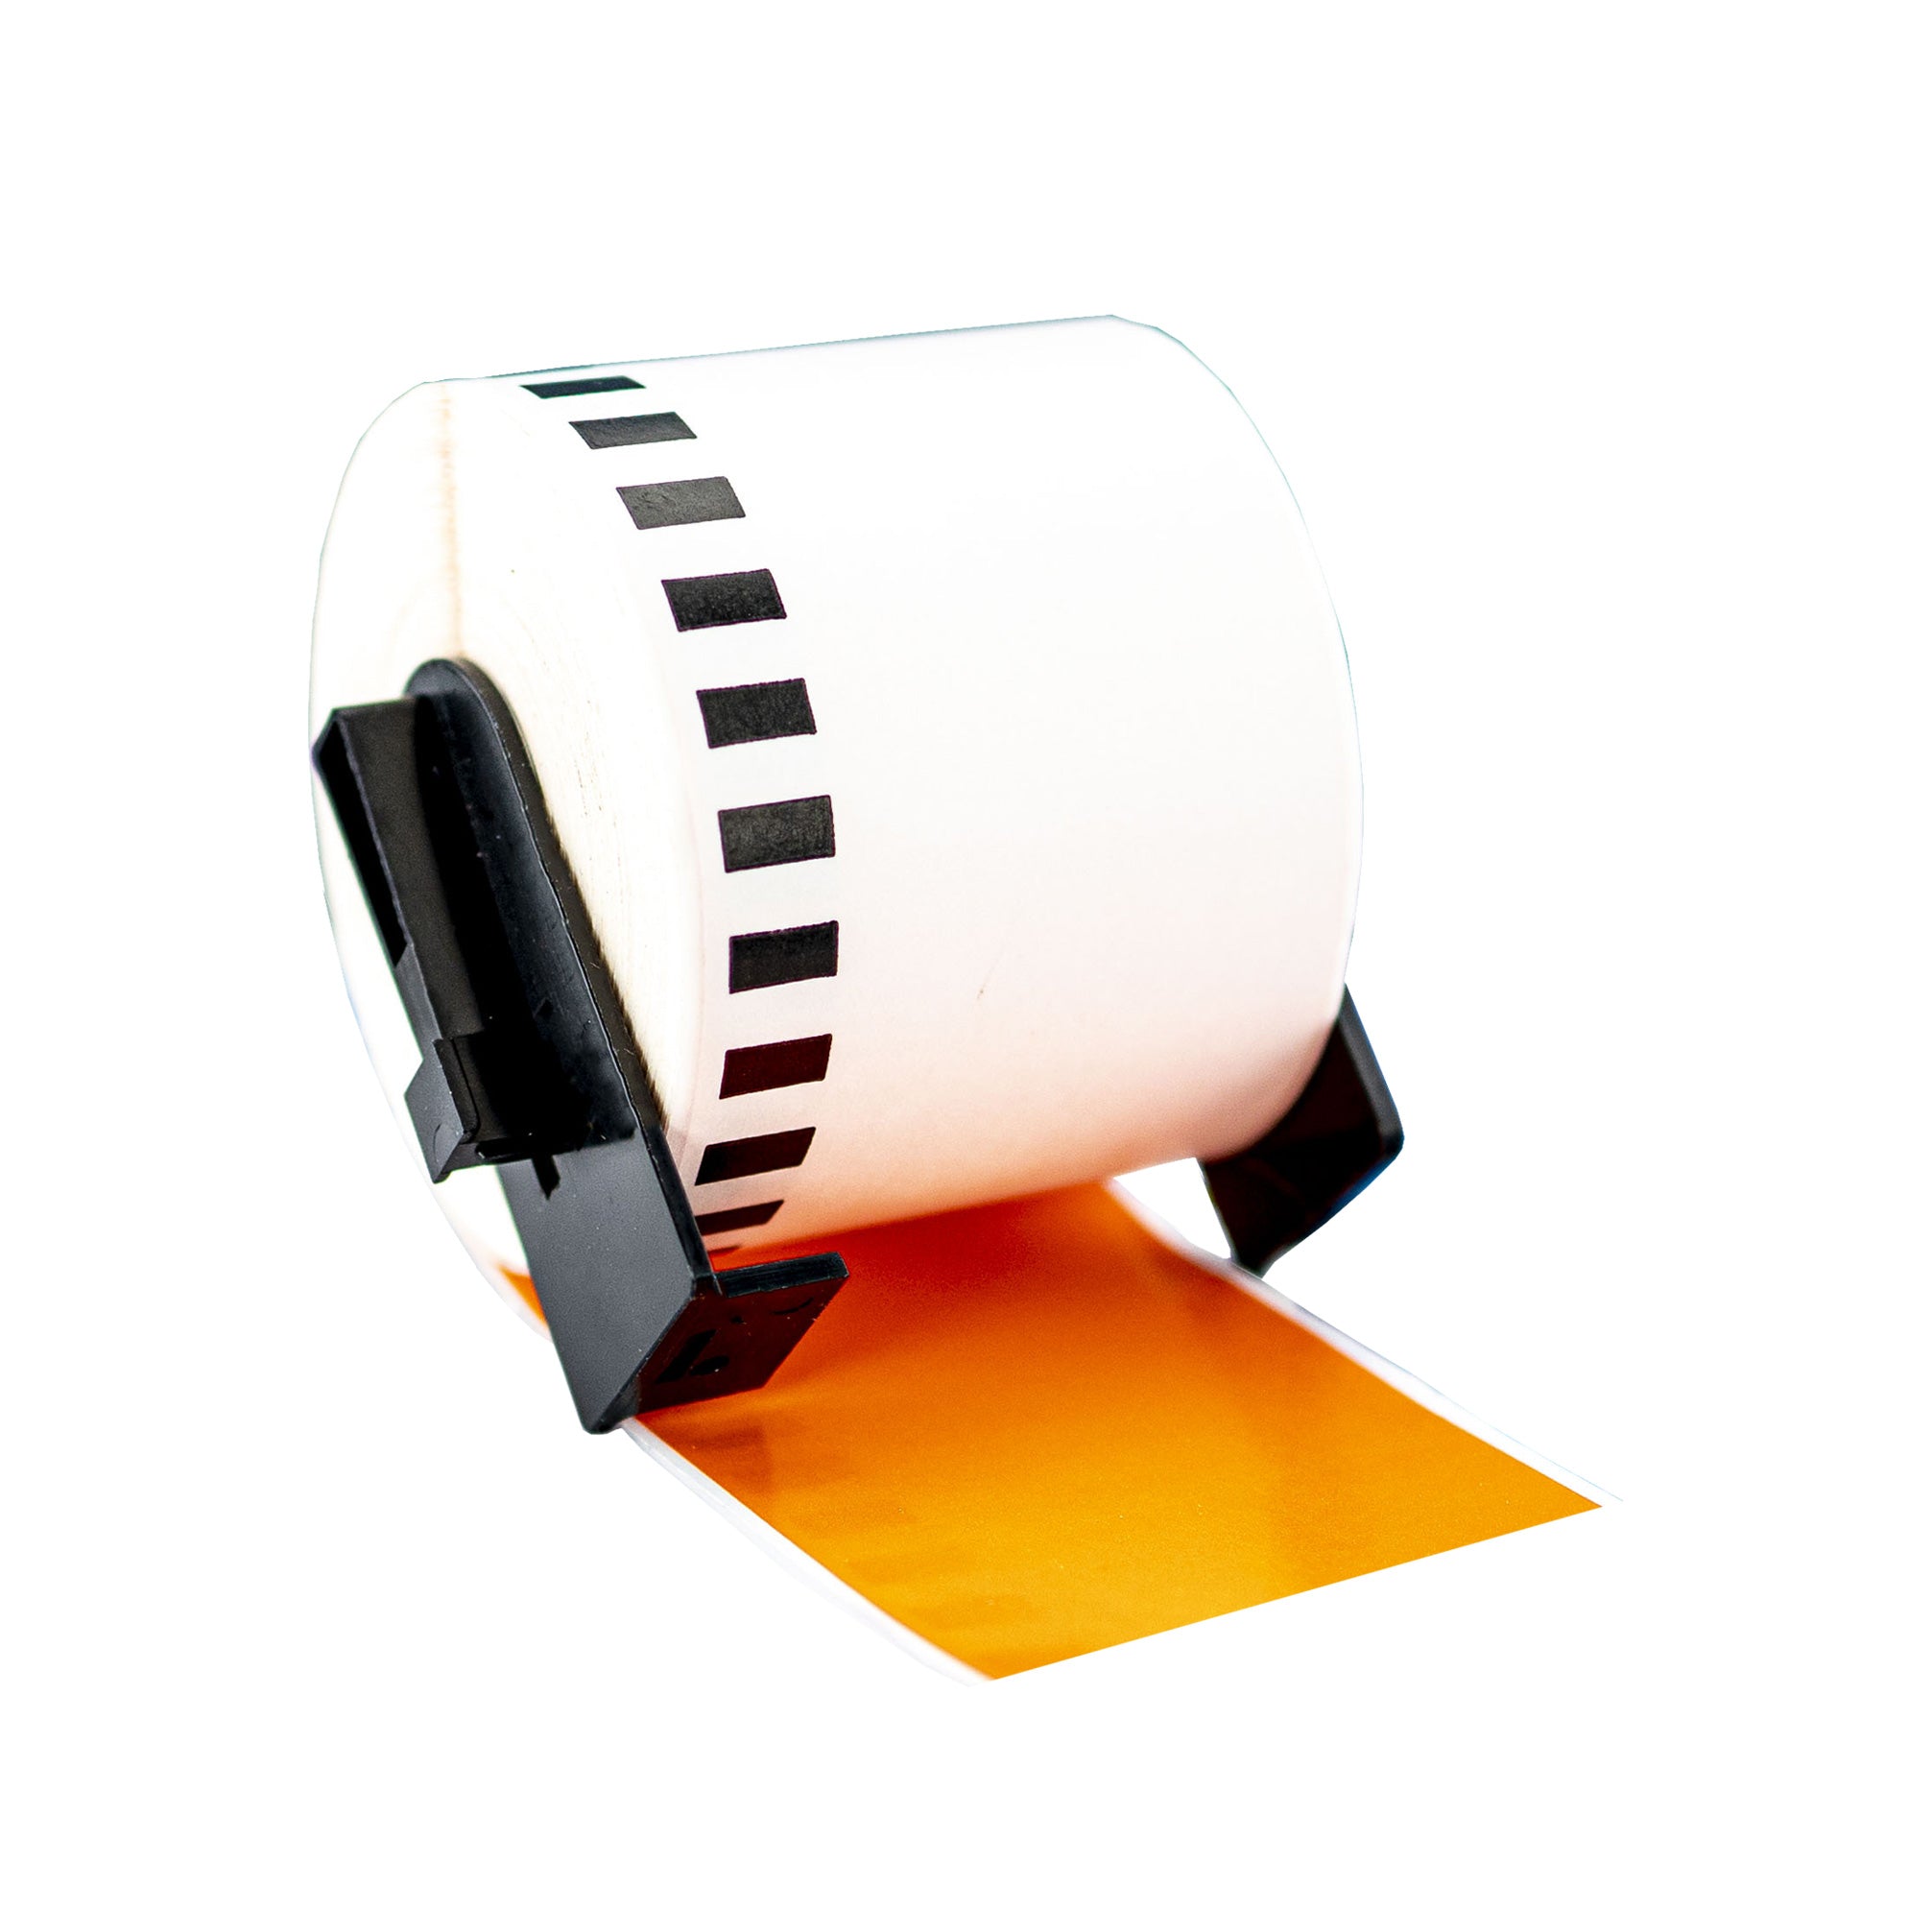 Compatible Brother DK-11202 Orange Shipping Labels 62 x 100mm/ 50 Rolls